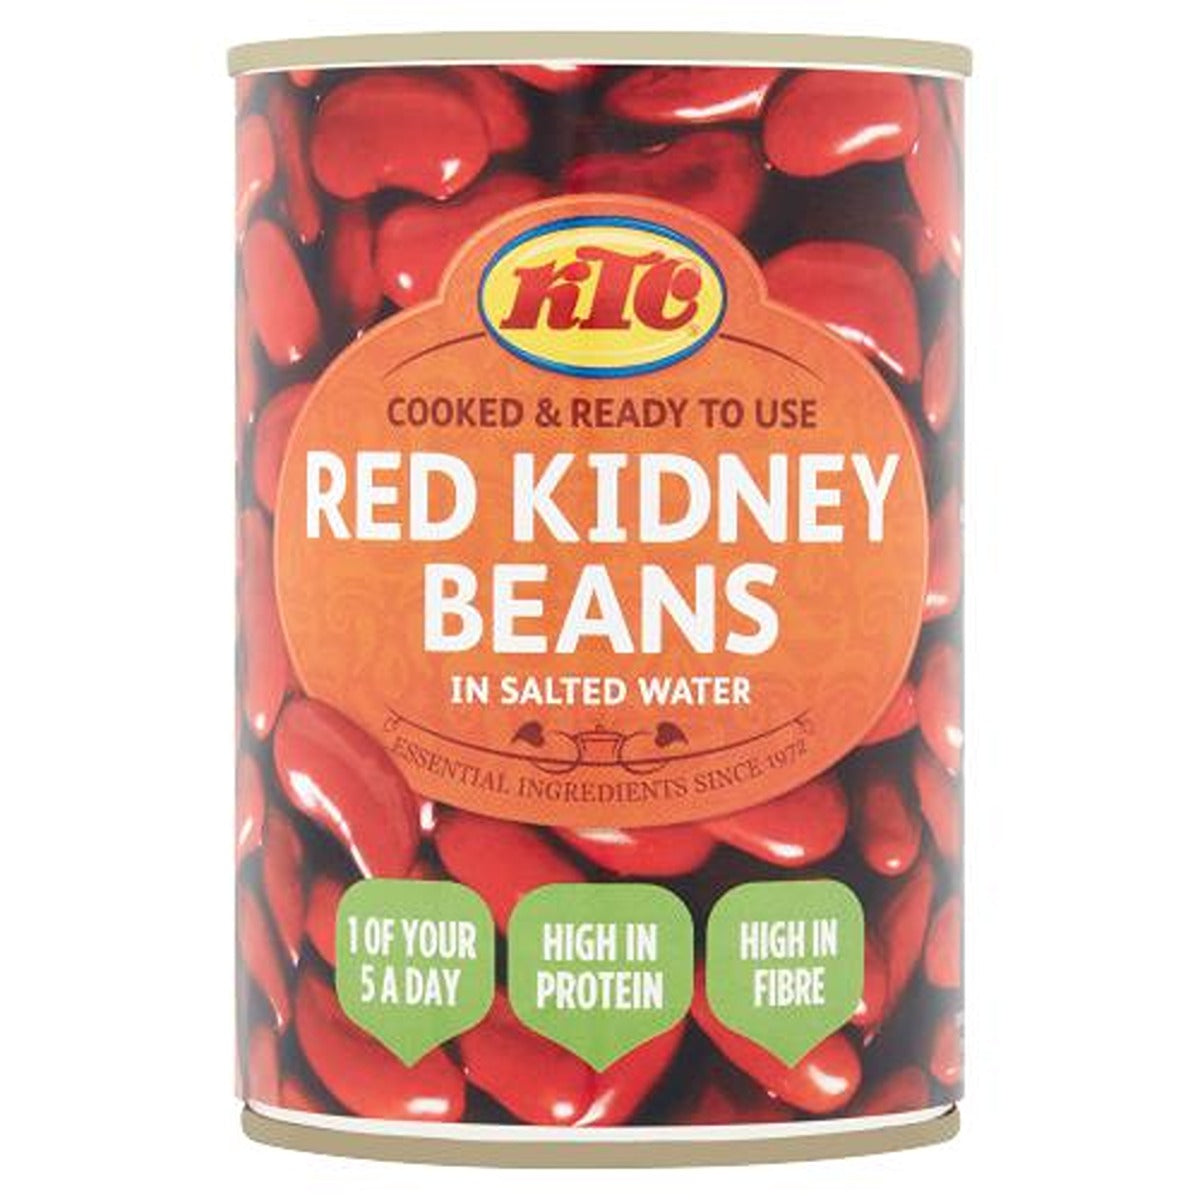 KTC - Red Kidney Beans in Salted Water - 400g - Continental Food Store